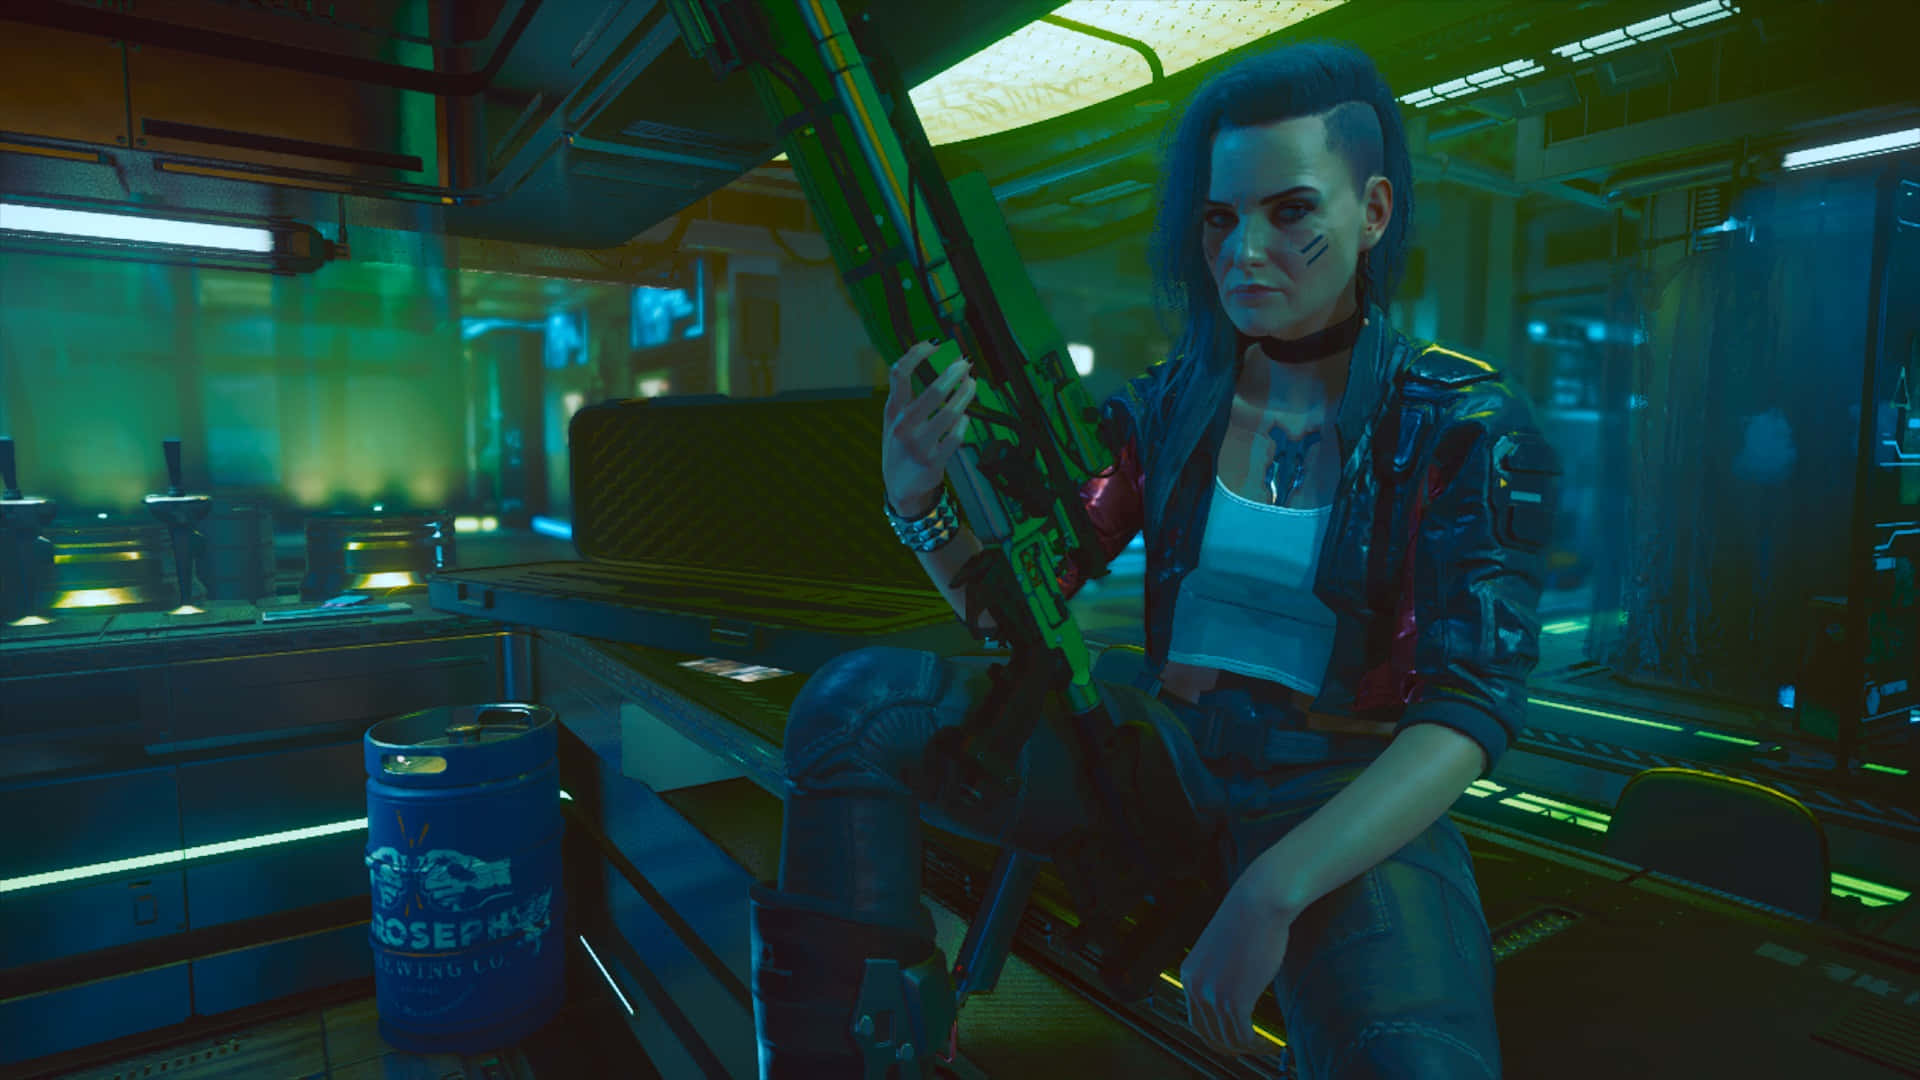 Fierce Cyberpunk 2077 Characters Ready for Action in Night City Wallpaper